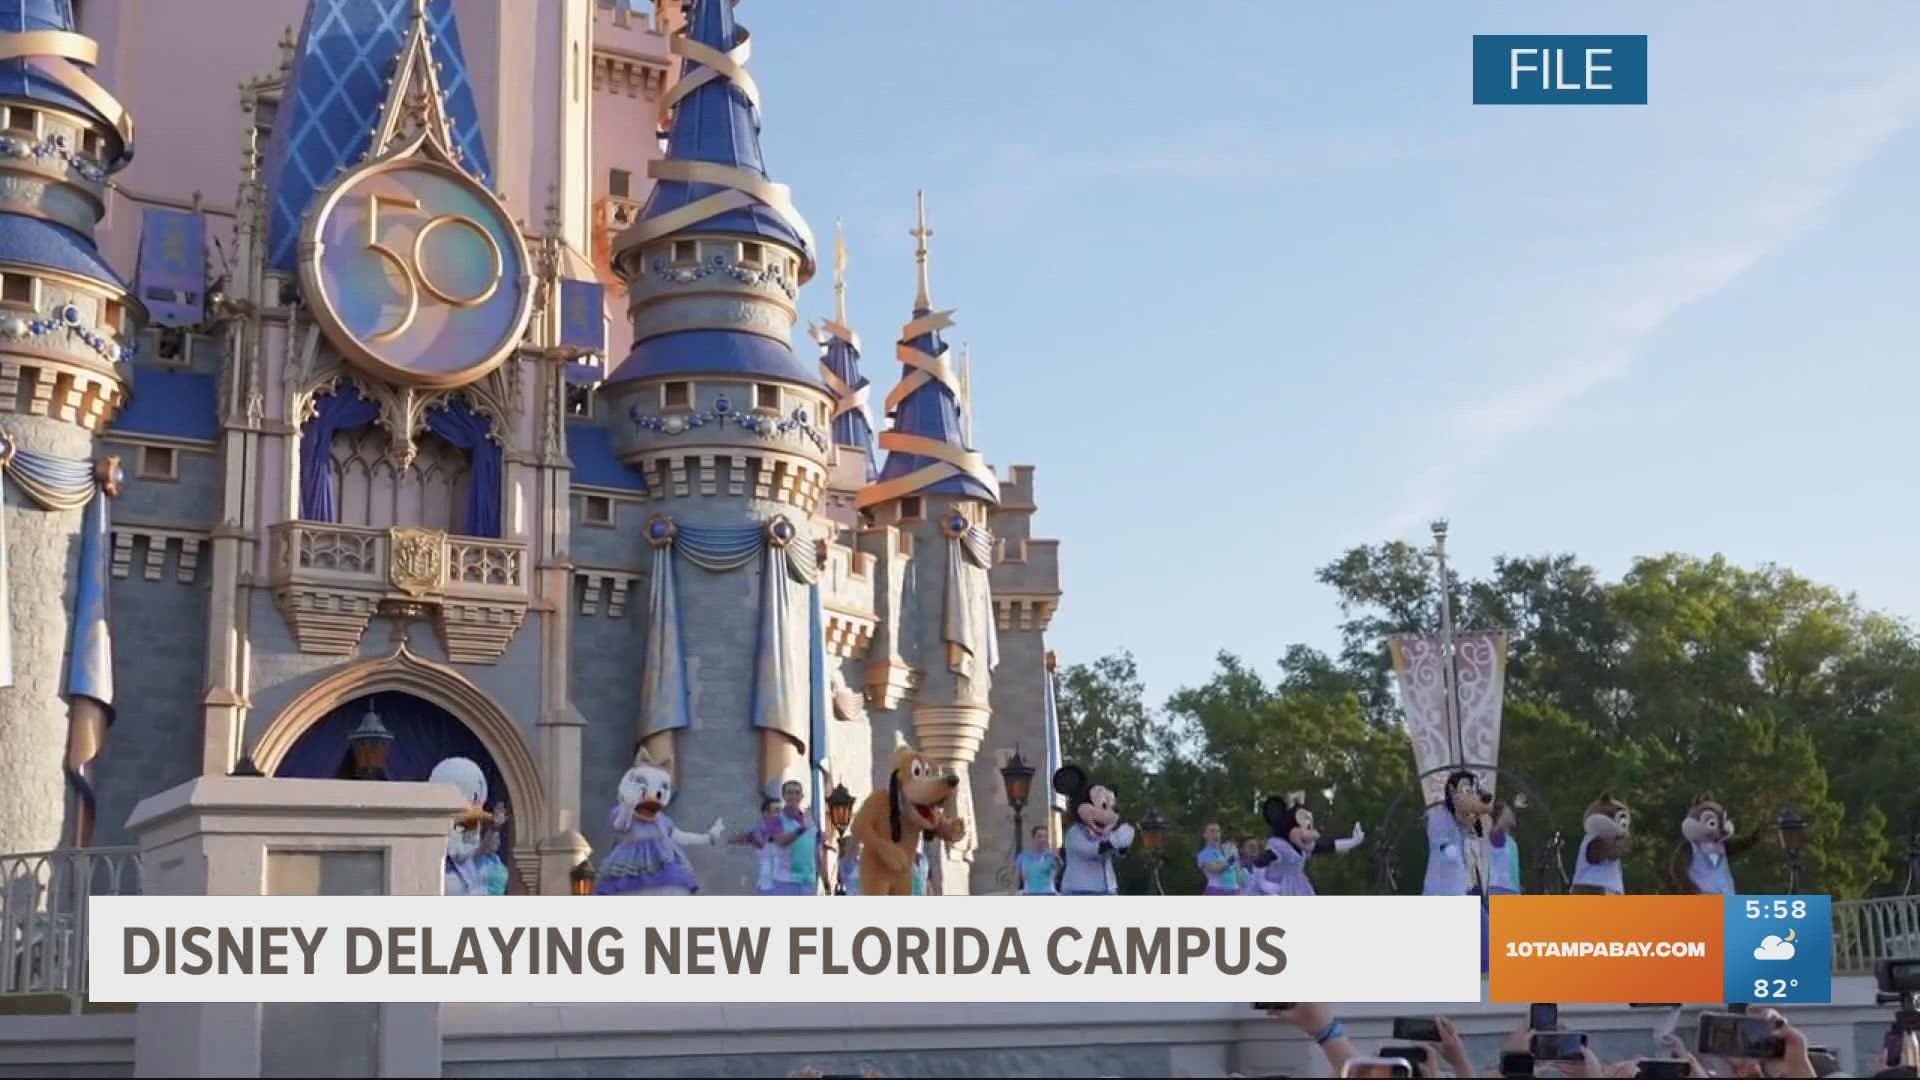 The Walt Disney Co. is delaying by more than three years the opening of a campus in Florida to which 2,000 workers were being relocated from Southern California.